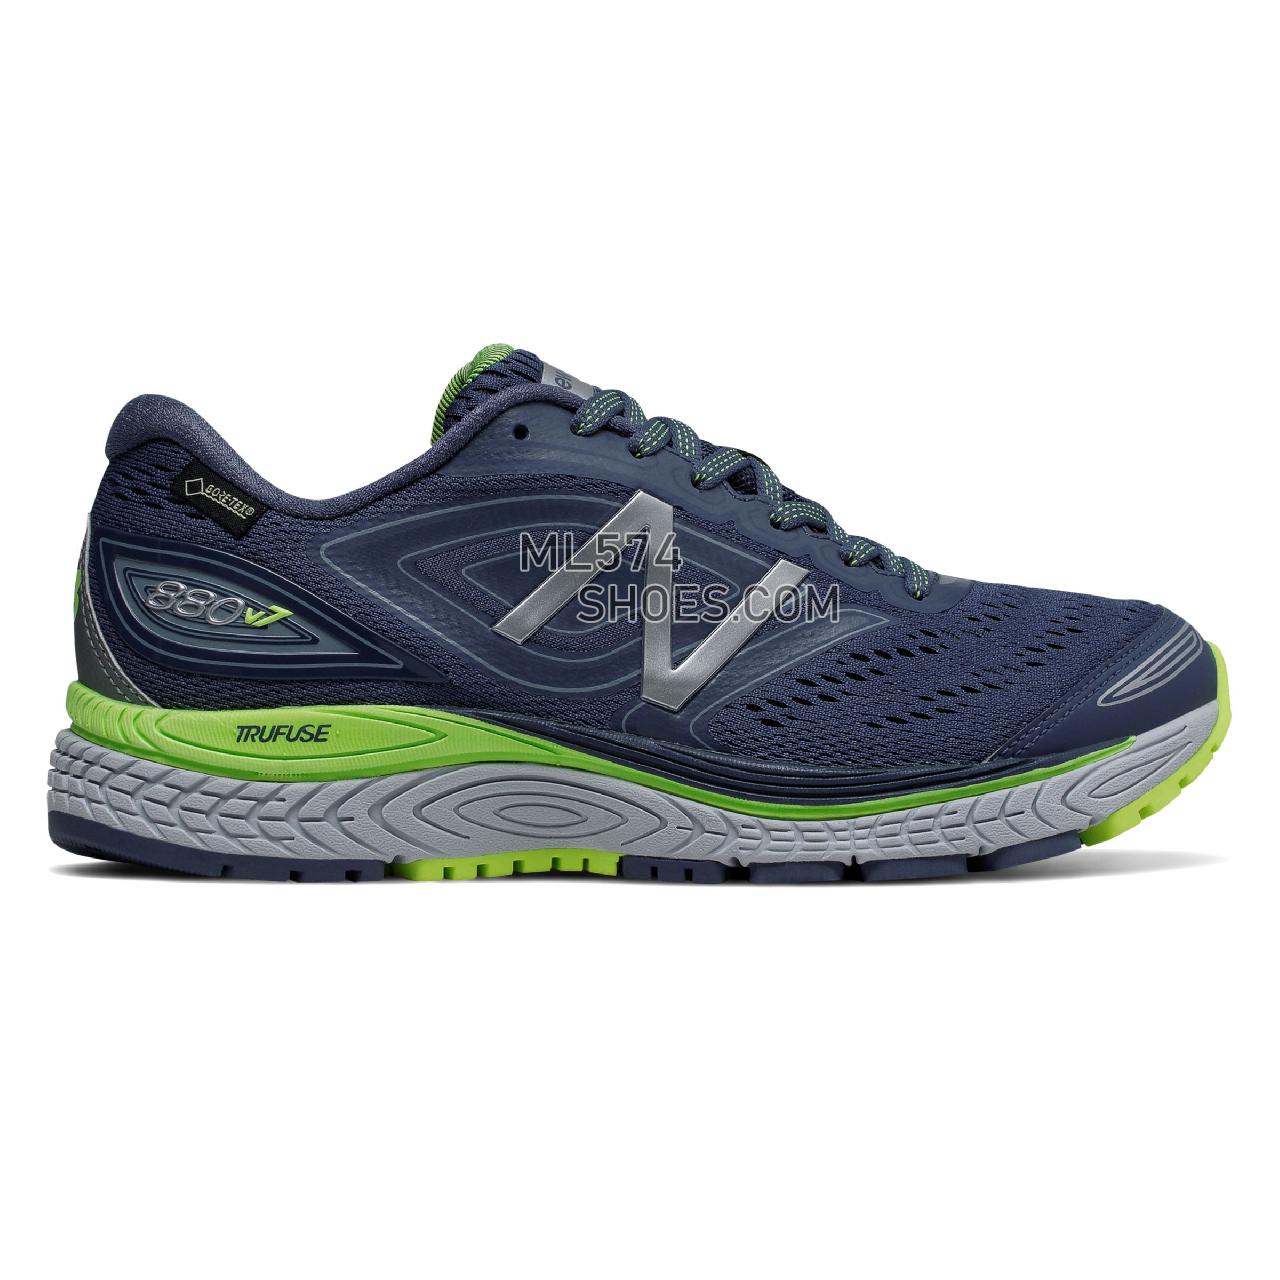 New Balance 880v7 GTX - Women's 880 - Running Vintage Indigo with Cyclone and Lime Glo - W880BX7